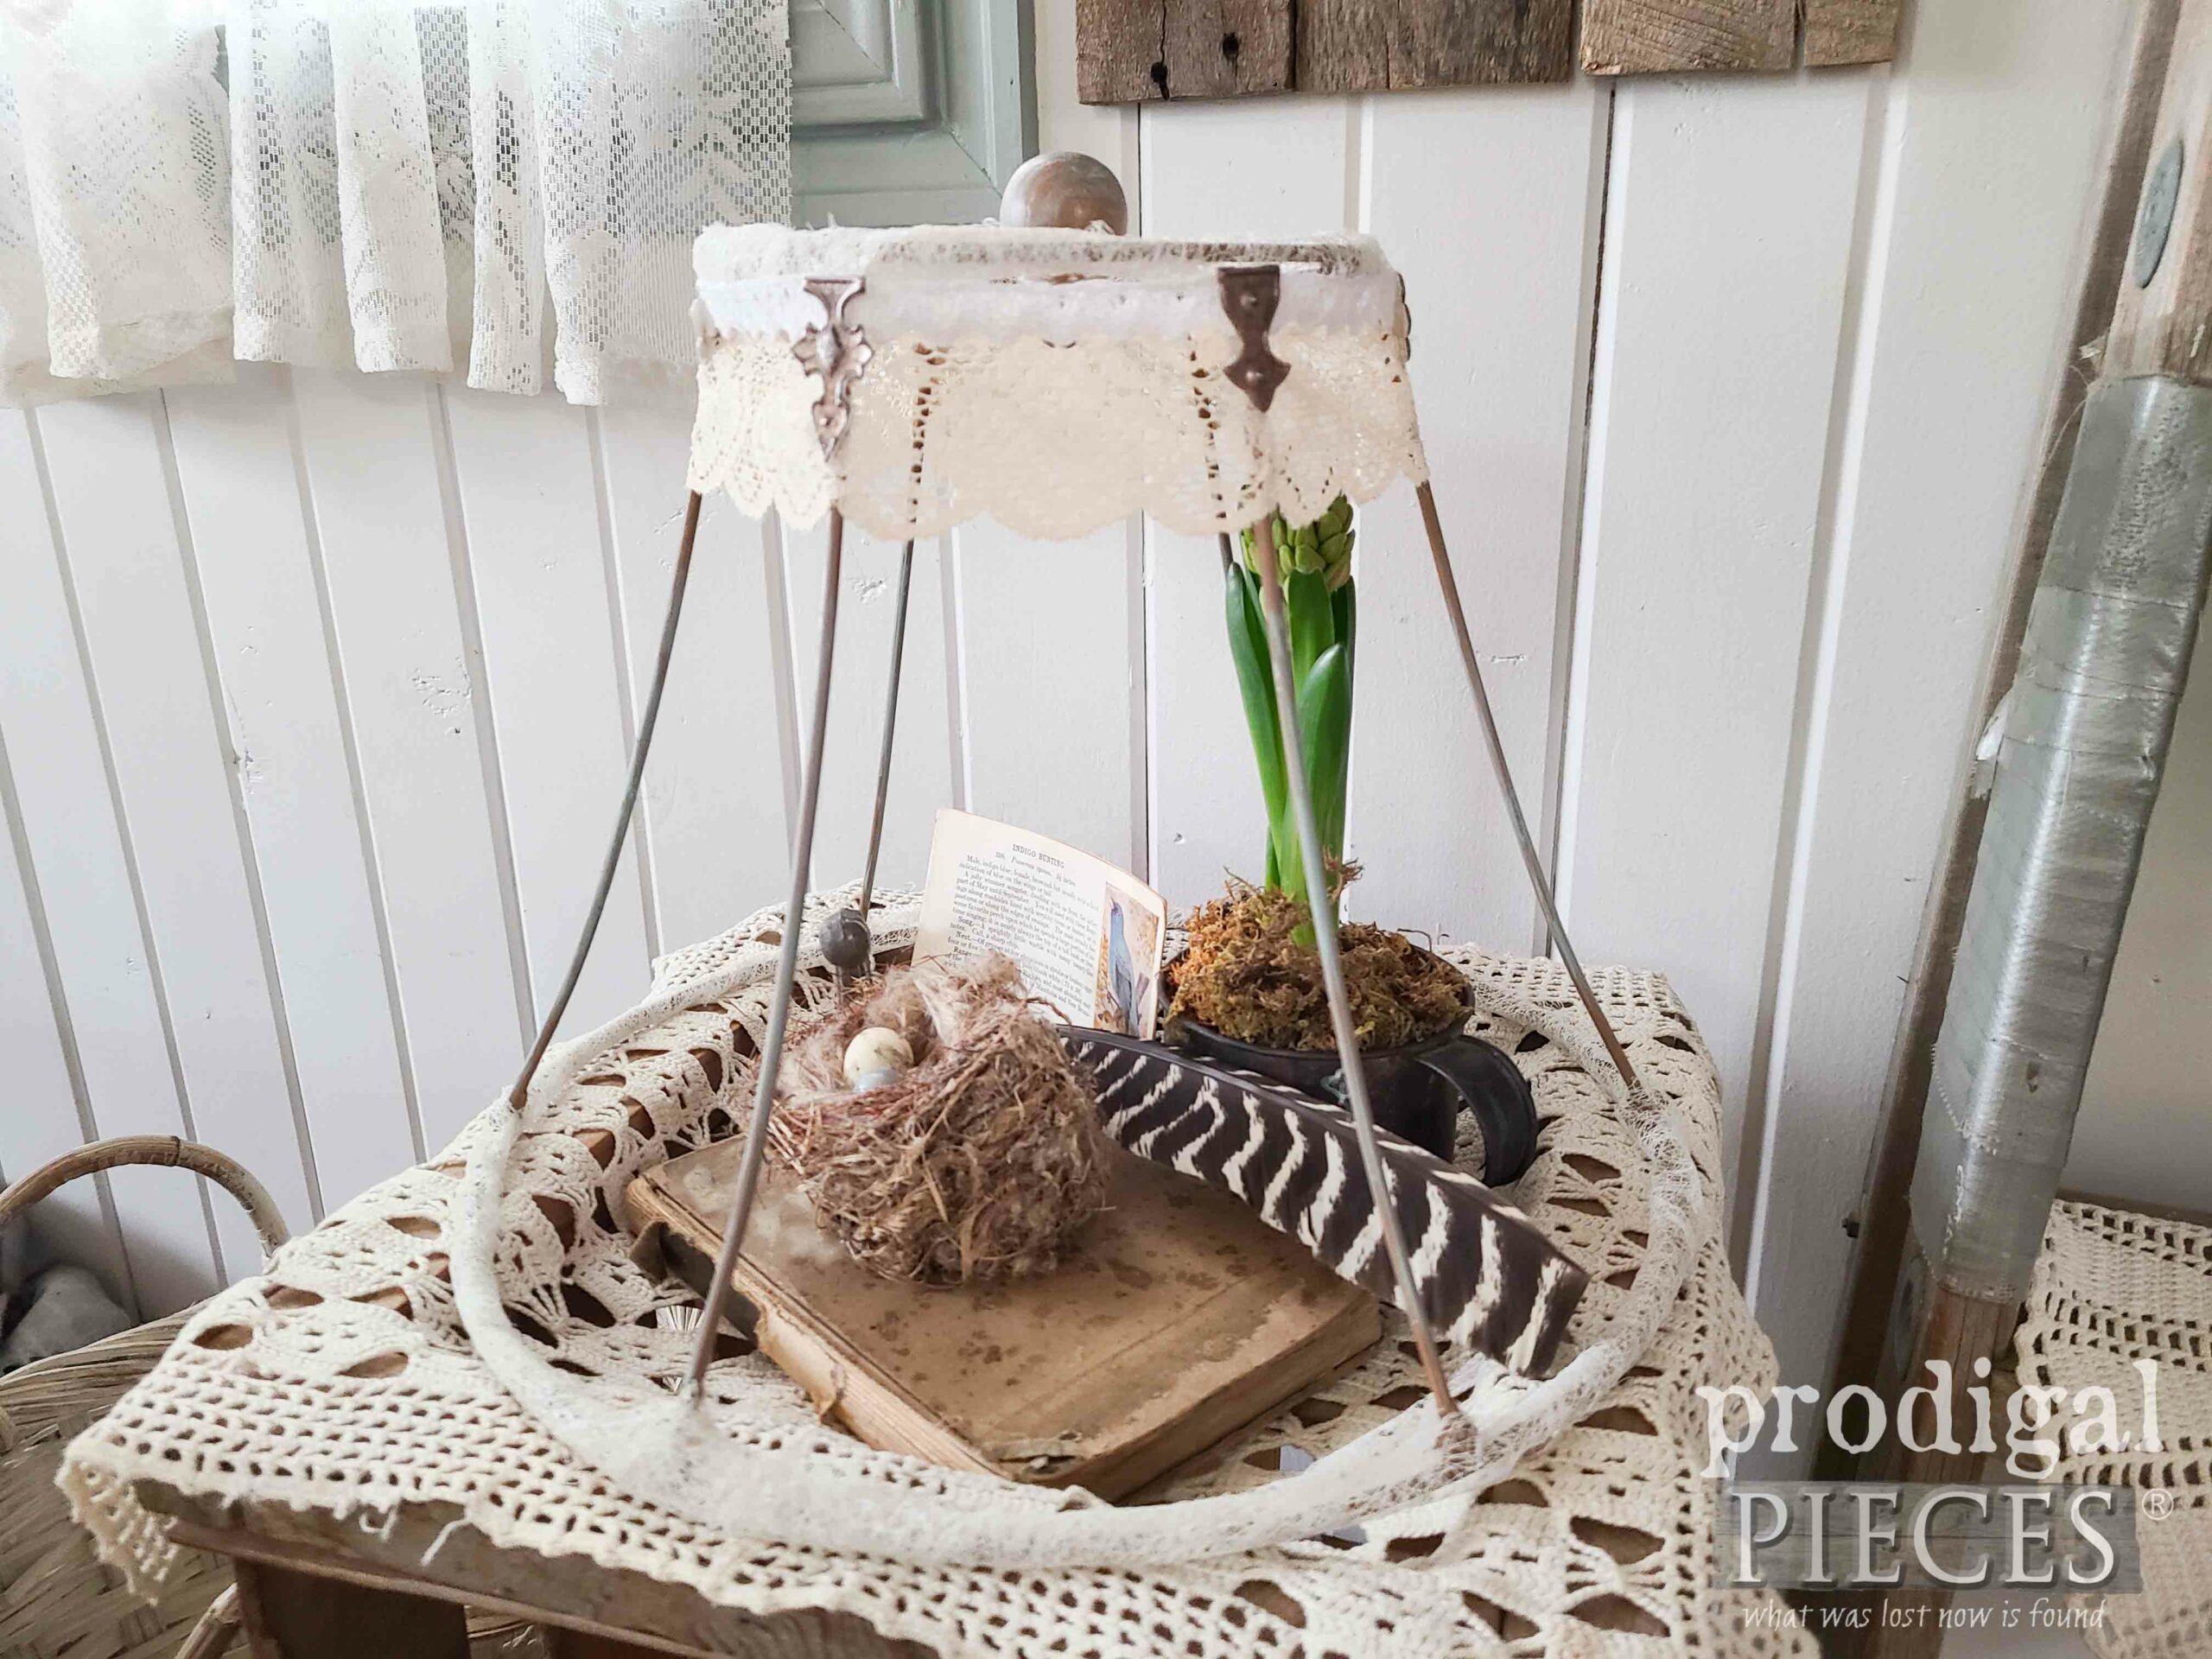 Farmhouse Style Cloche Made from Repurposed Lampshade by Larissa of Prodigal Pieces | prodigalpieces.com #prodigalpieces #repurposed #salvaged